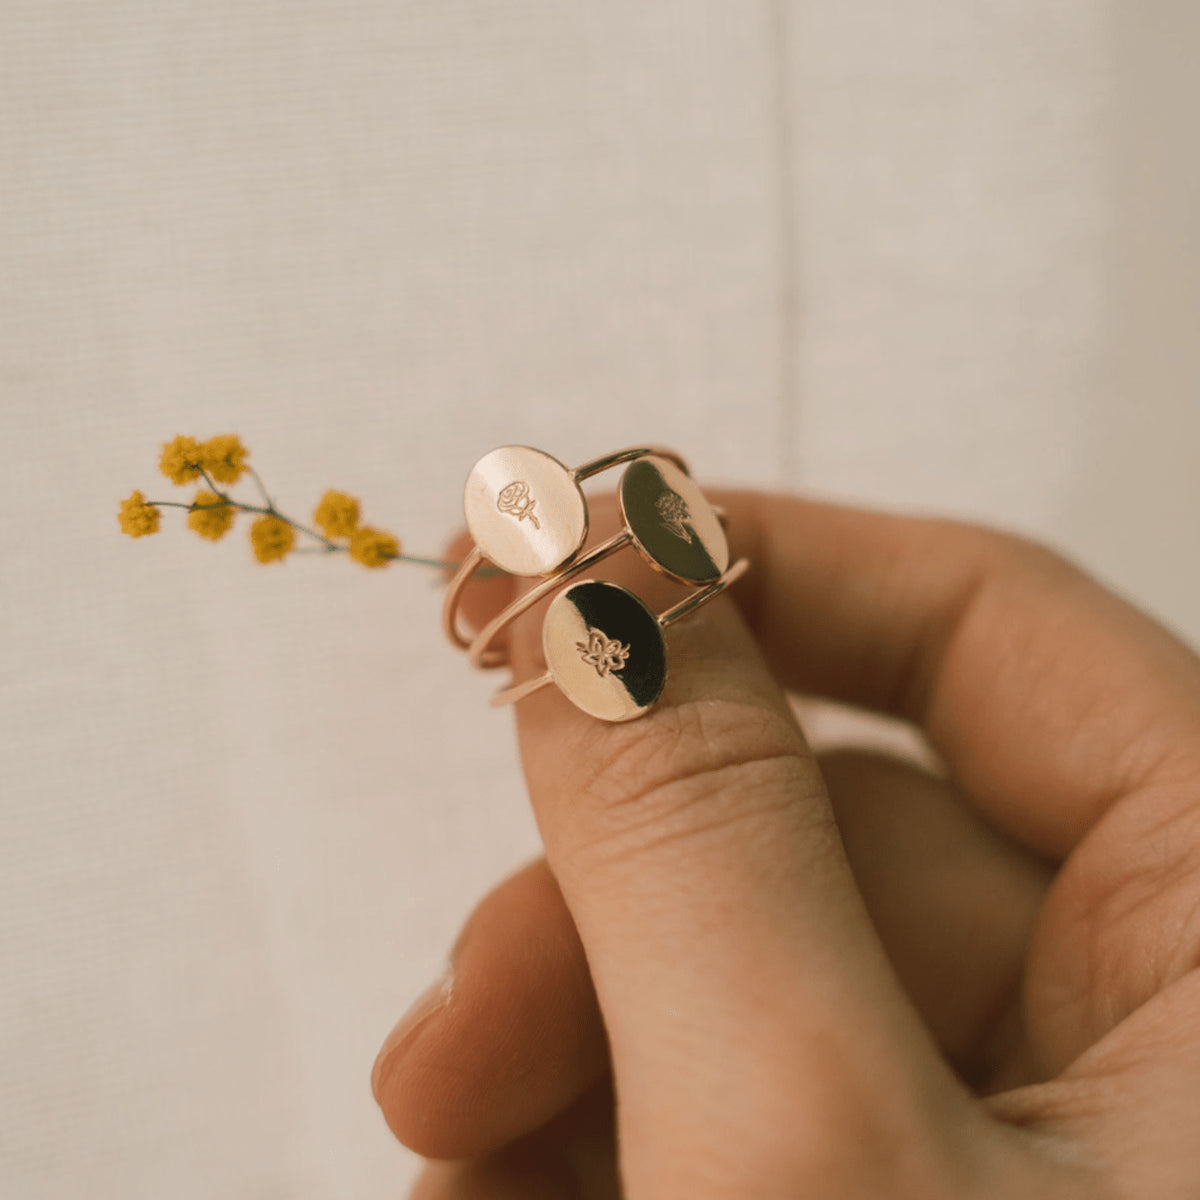 Oval Customized Ring - Initial or Birth Flower Ring